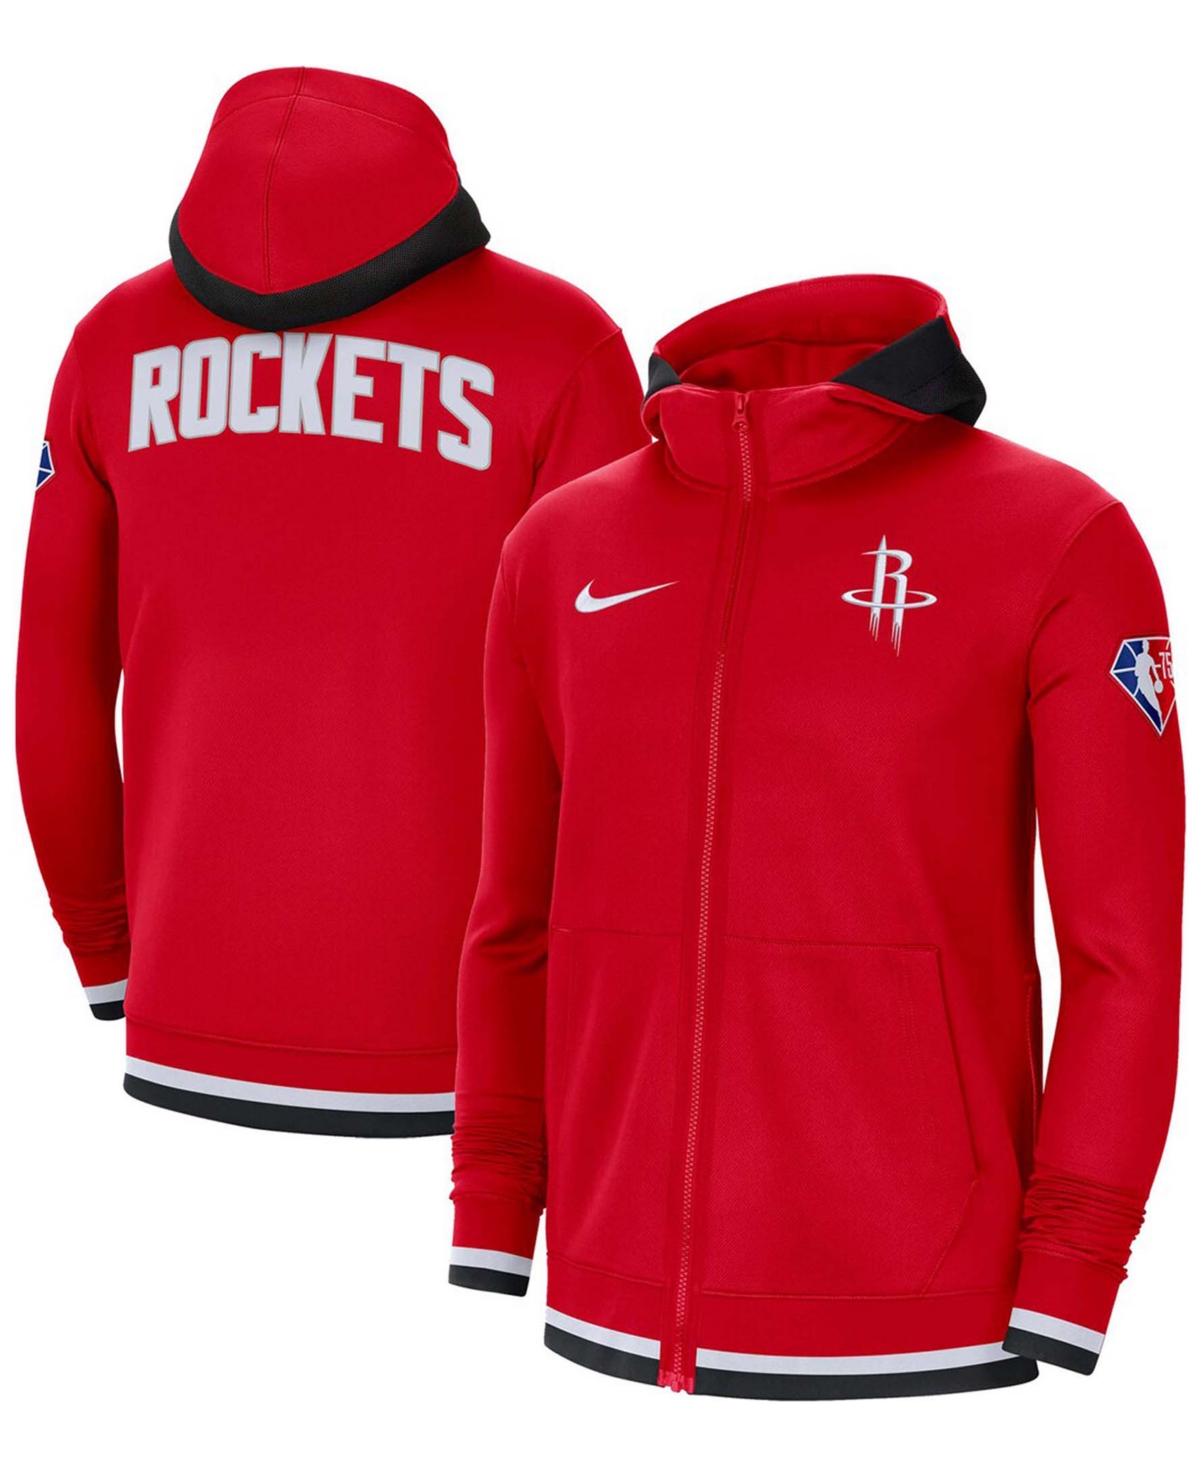 Men's Red Houston Rockets 75th Anniversary Performance Showtime Hoodie Full-Zip Jacket